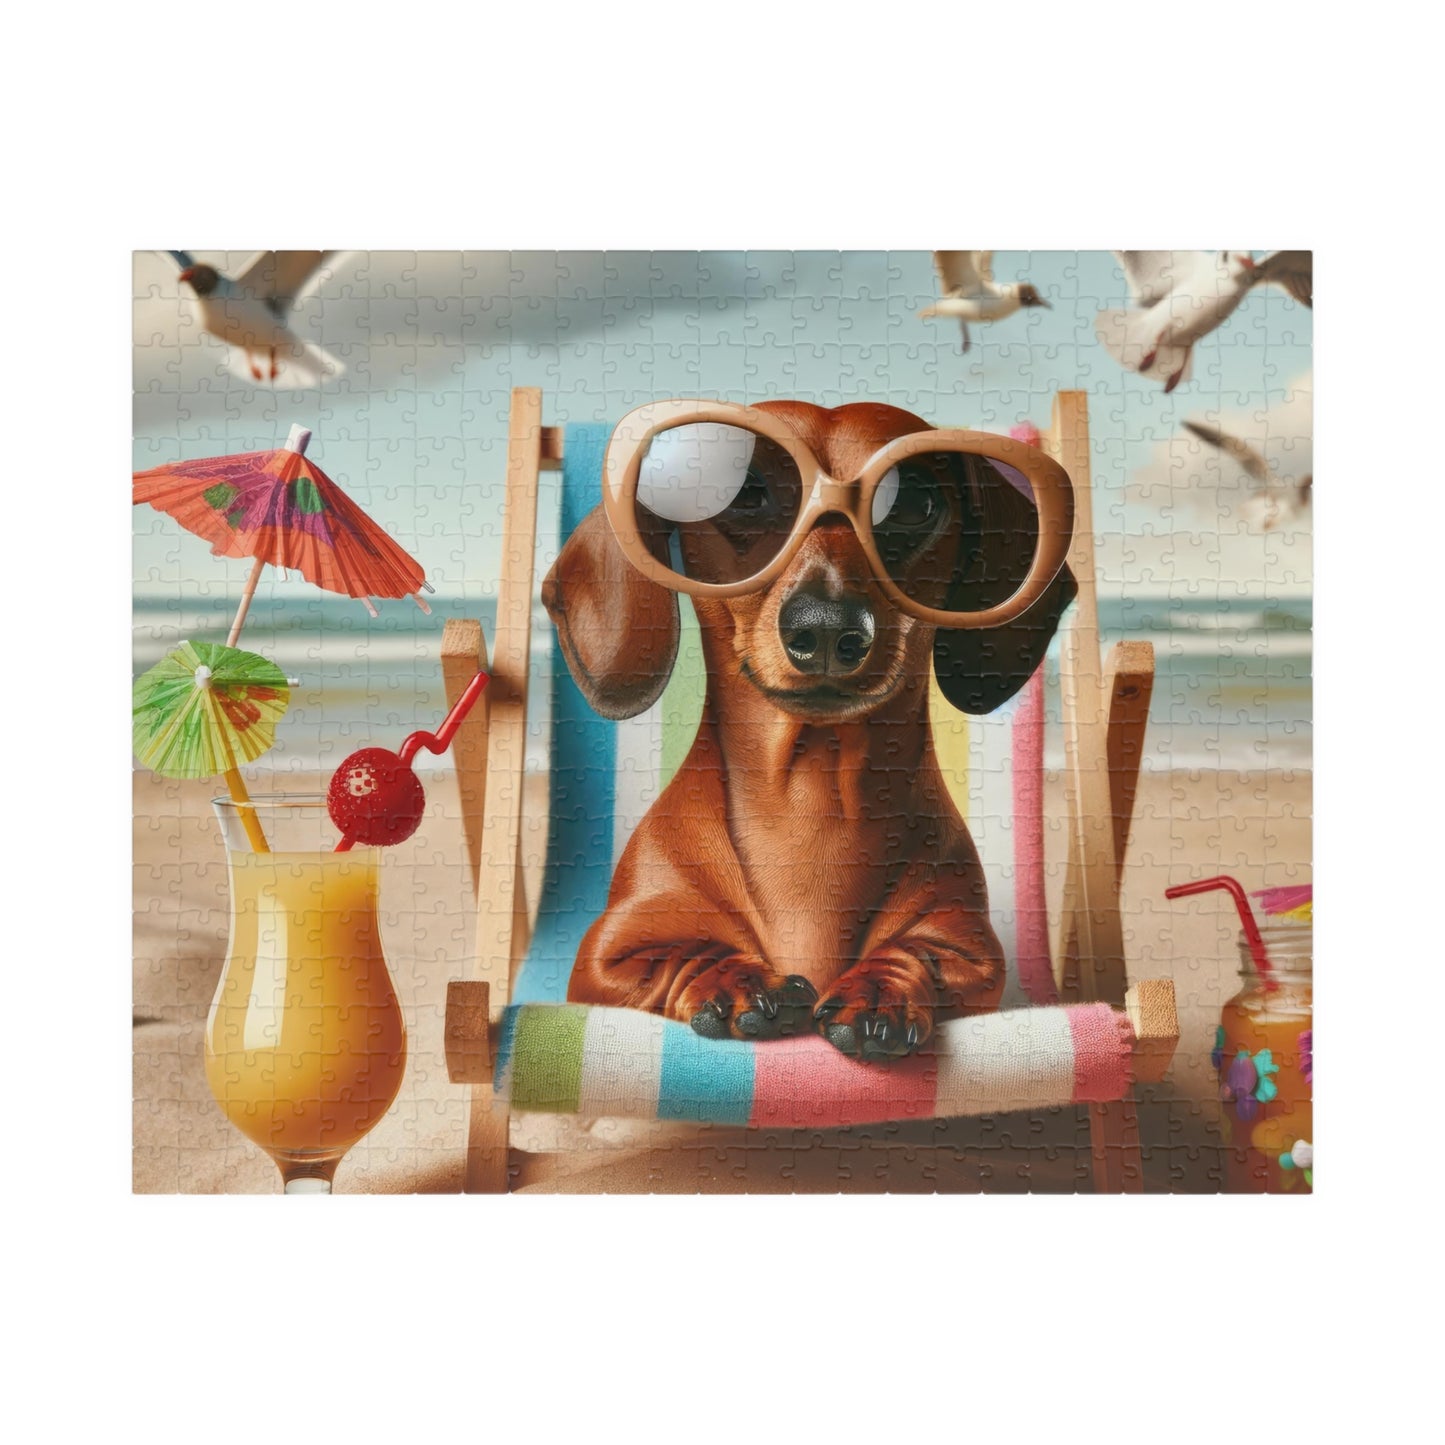 Sunny Dachshund Beach Puzzle - Coco on Vacation Jigsaw, Available in 110, 252, 520 Pieces, Glossy Finish